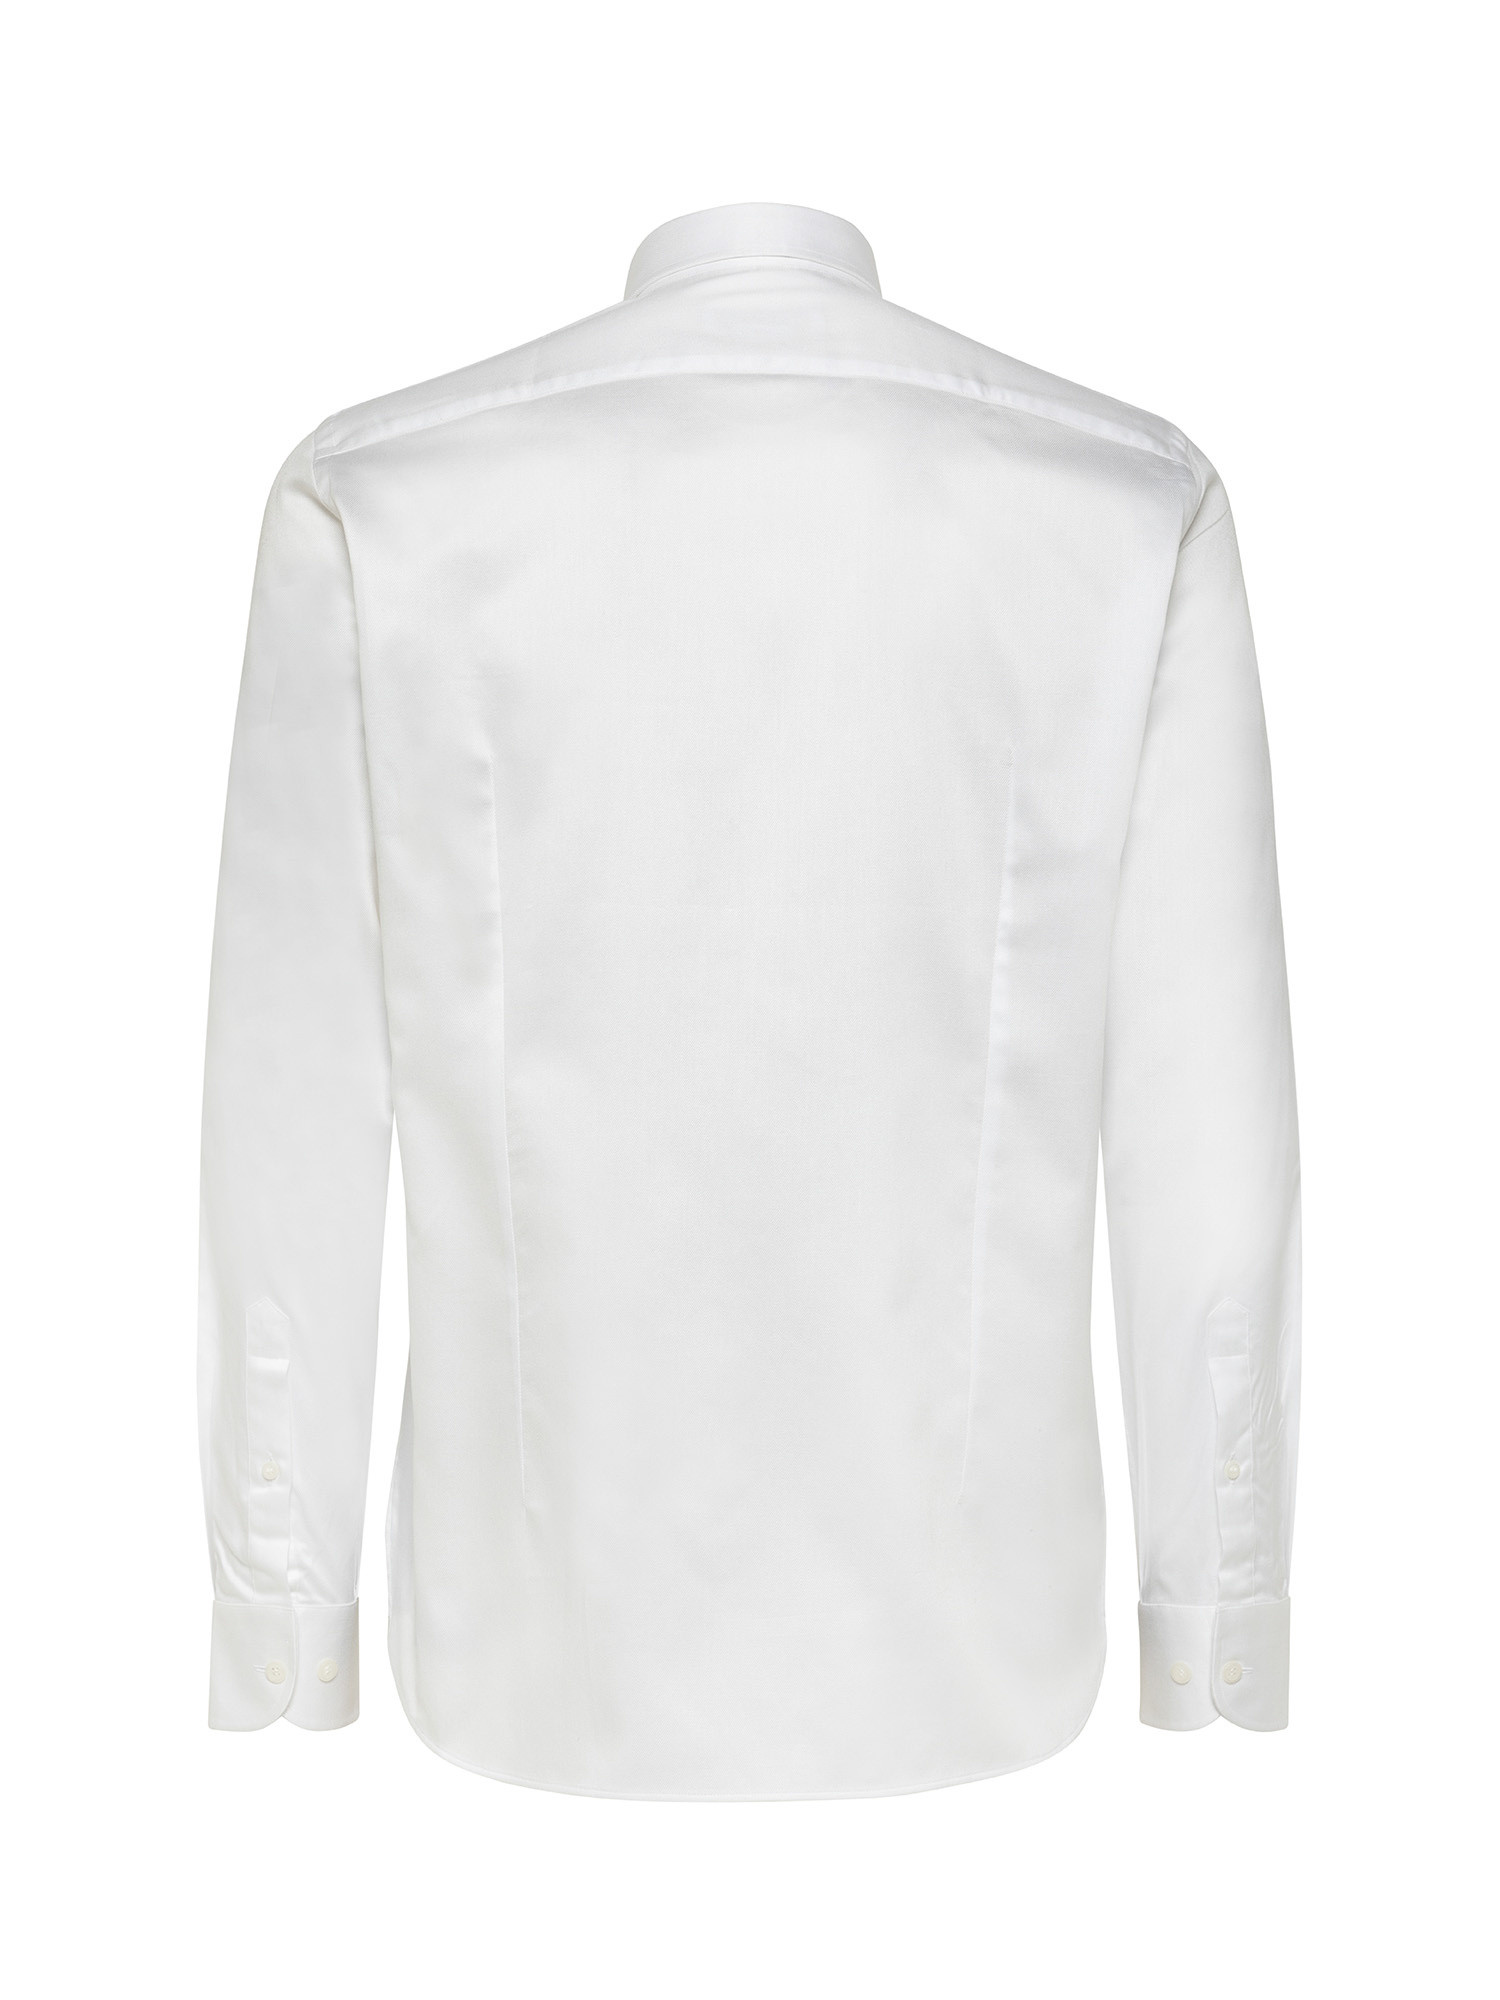 Slim fit shirt in pure cotton, White, large image number 2